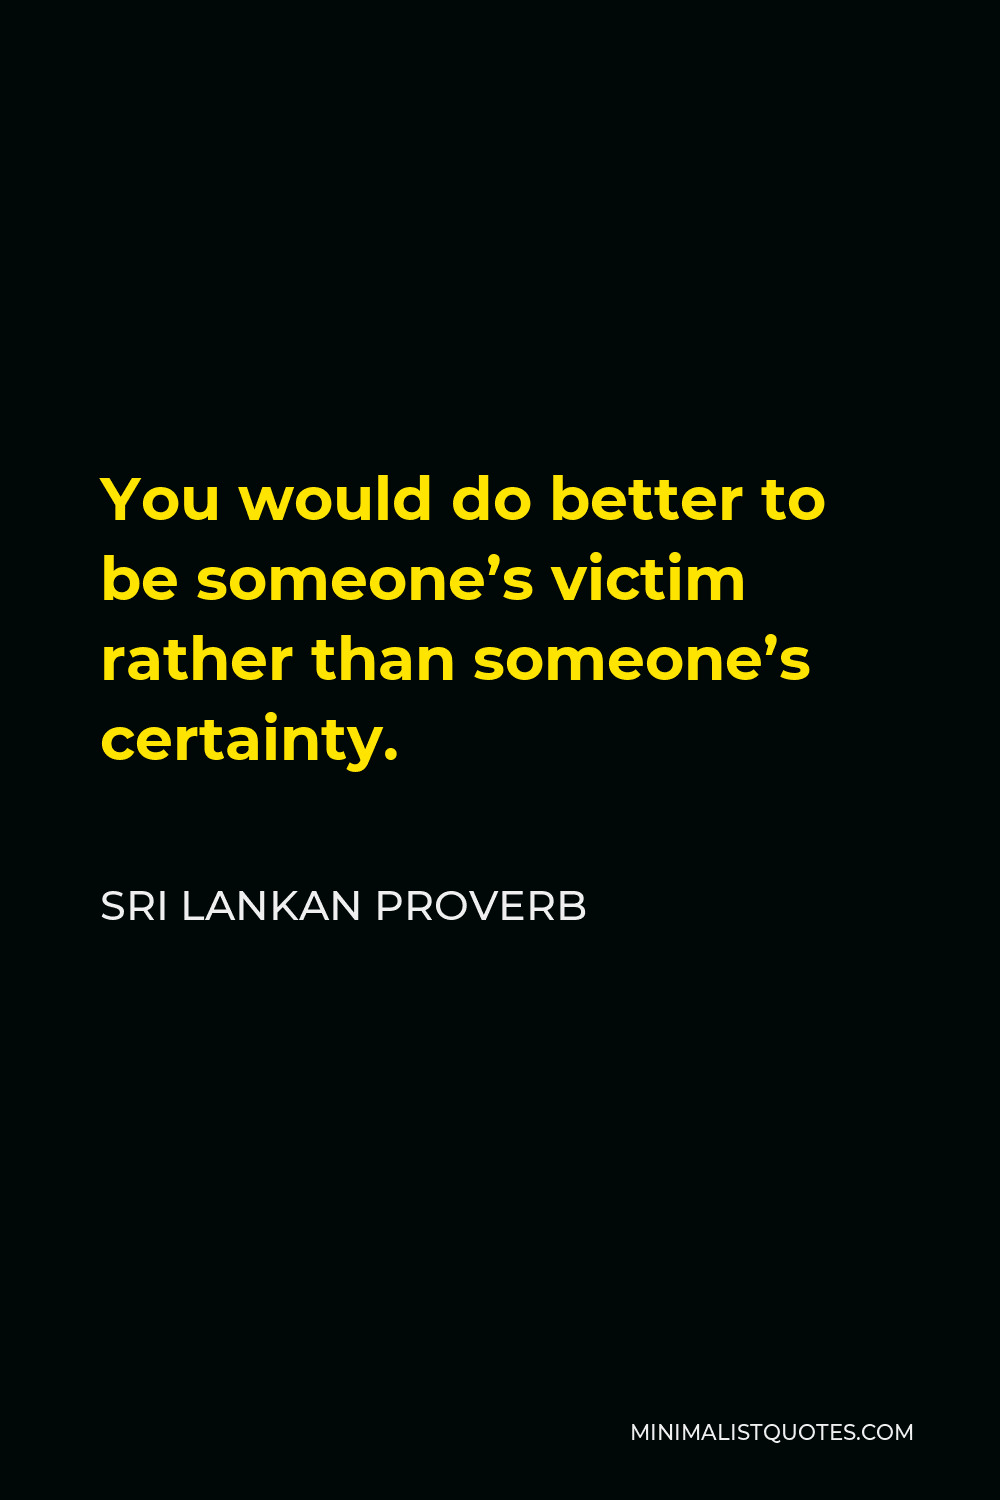 Sri Lankan Proverb Quote - You would do better to be someone’s victim rather than someone’s certainty.